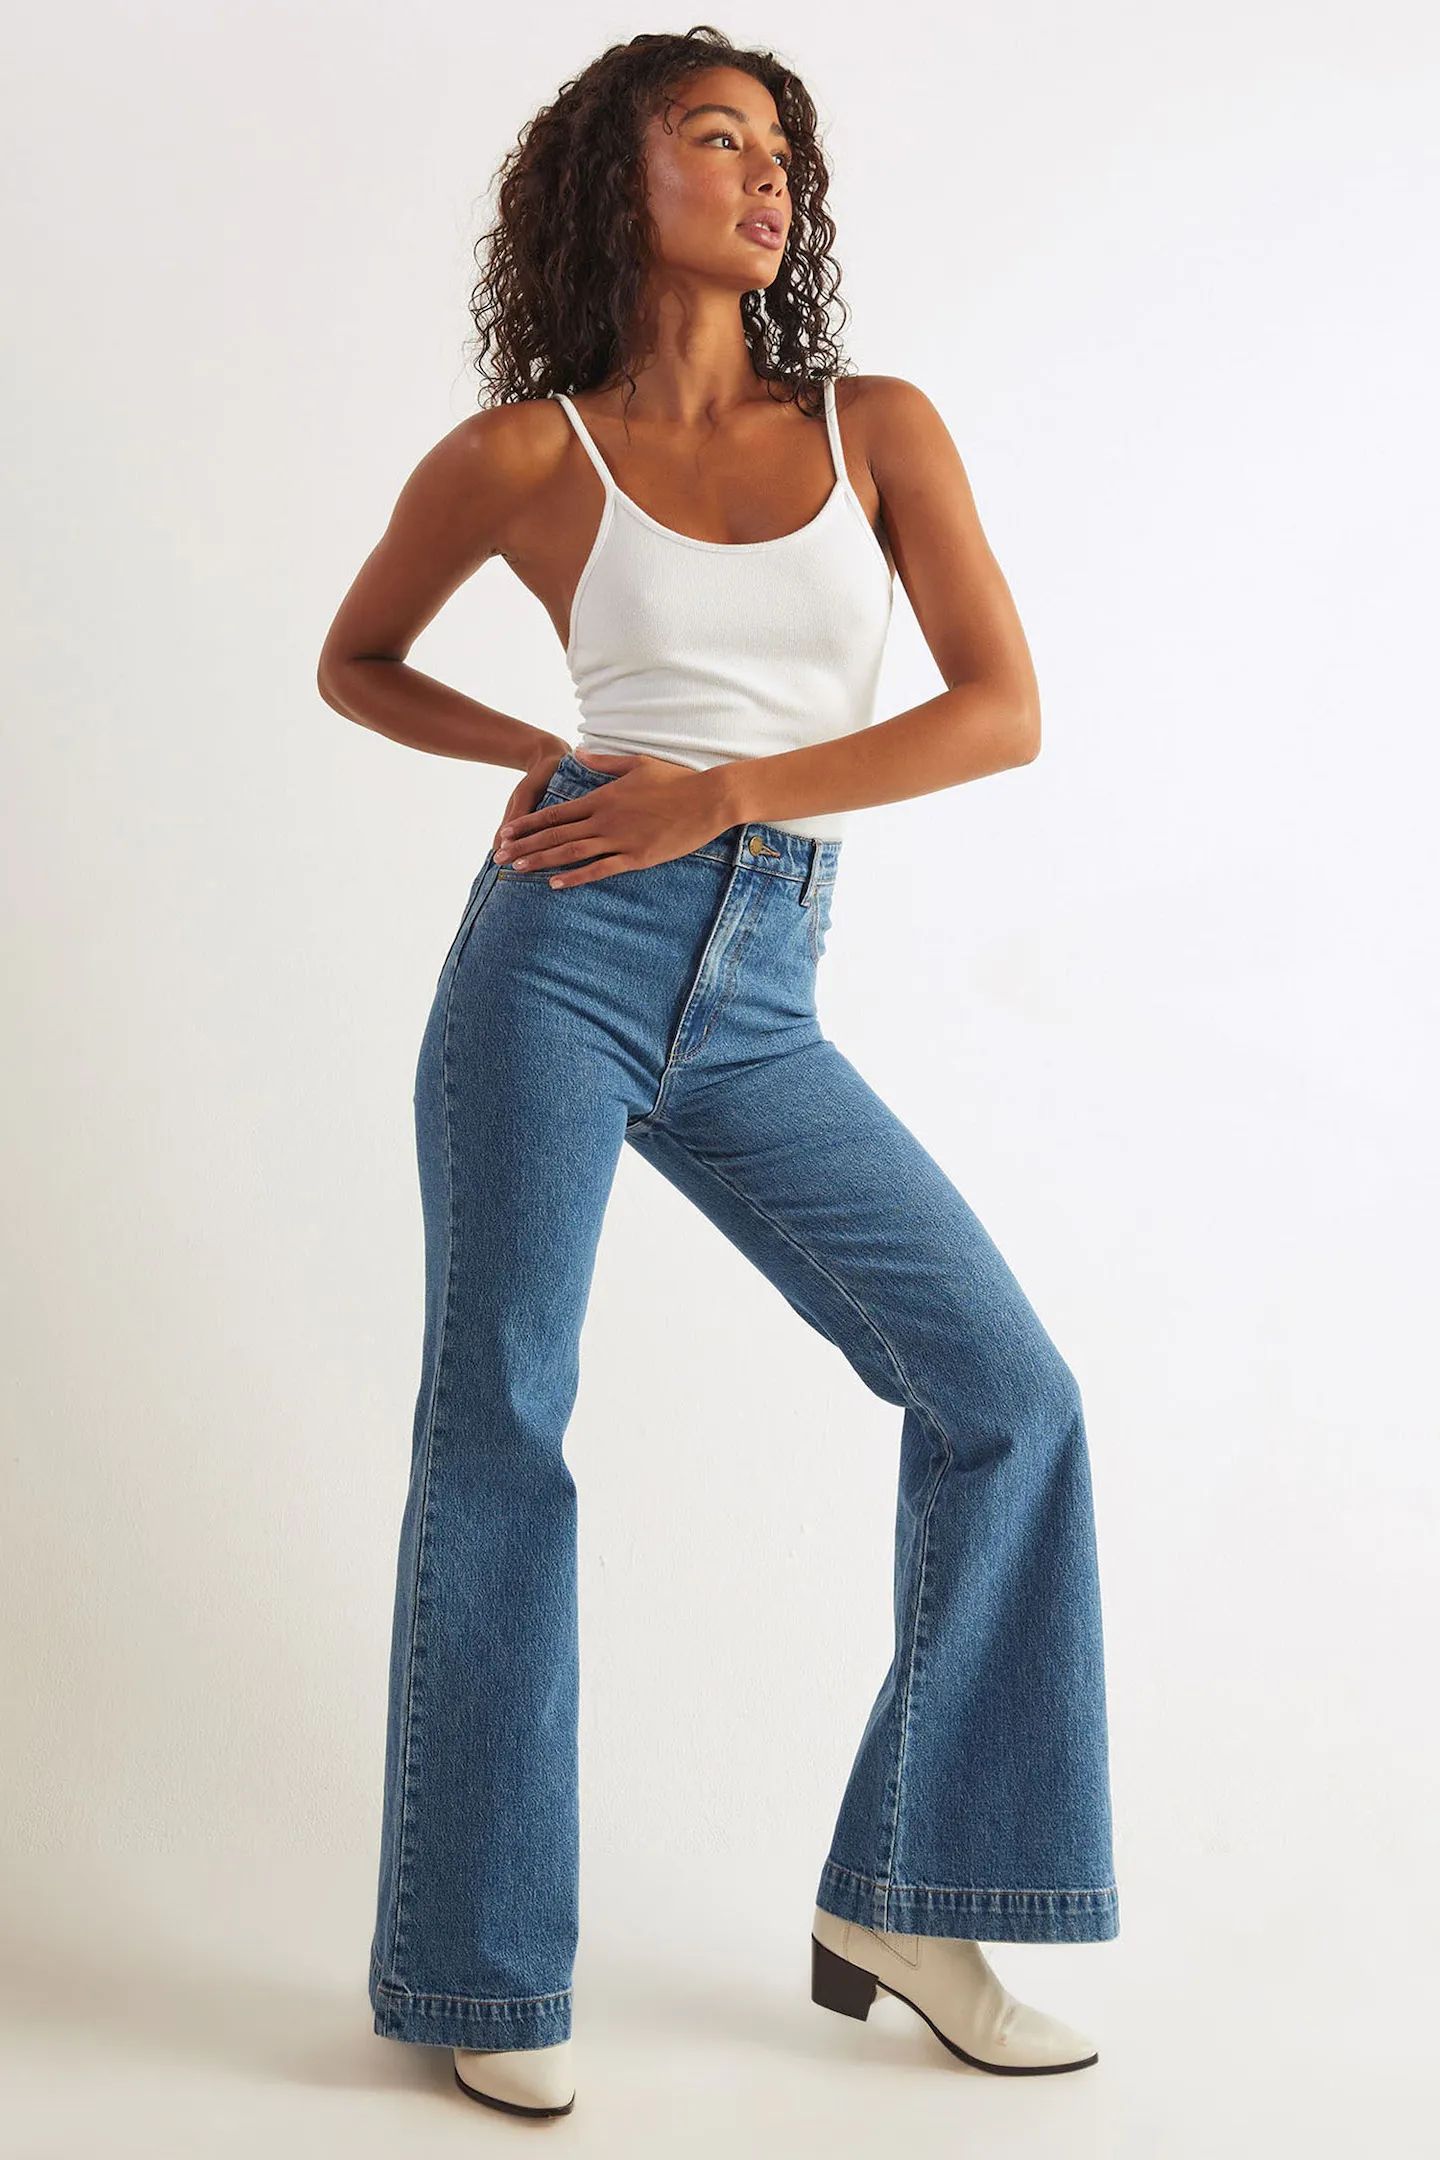 Eastcoast Flare - Sadie Blue | Rolla's Jeans US/CAN